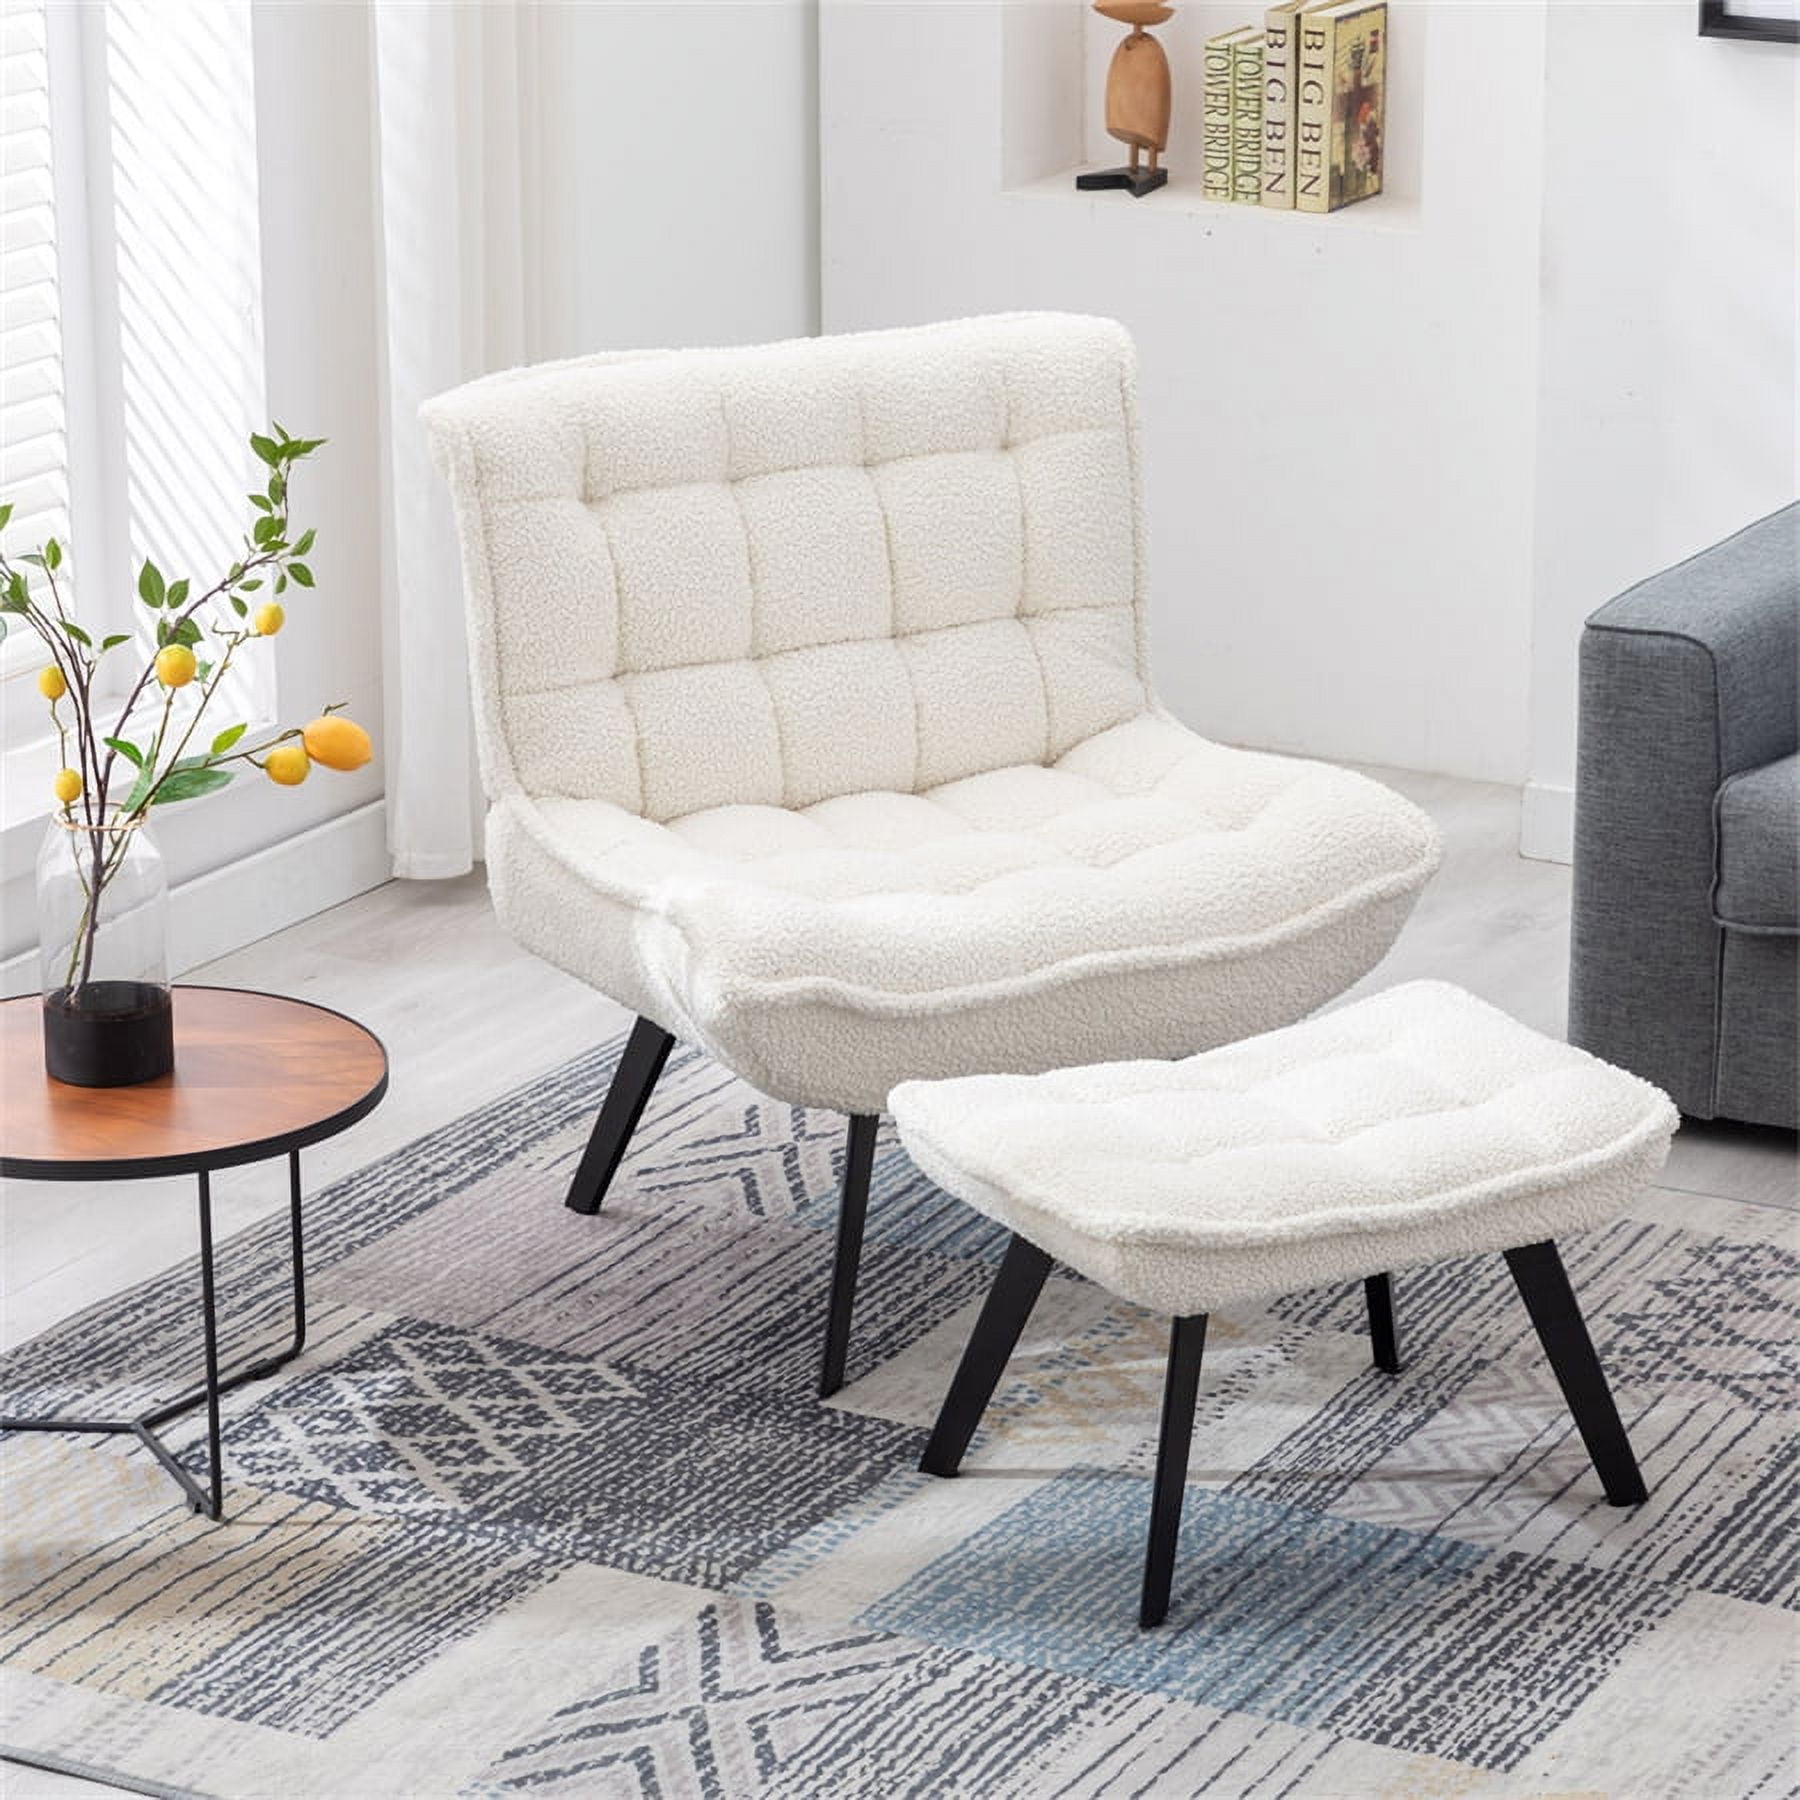 Add Modern Chair and Ottoman & Make Your Lounge Area A Statement